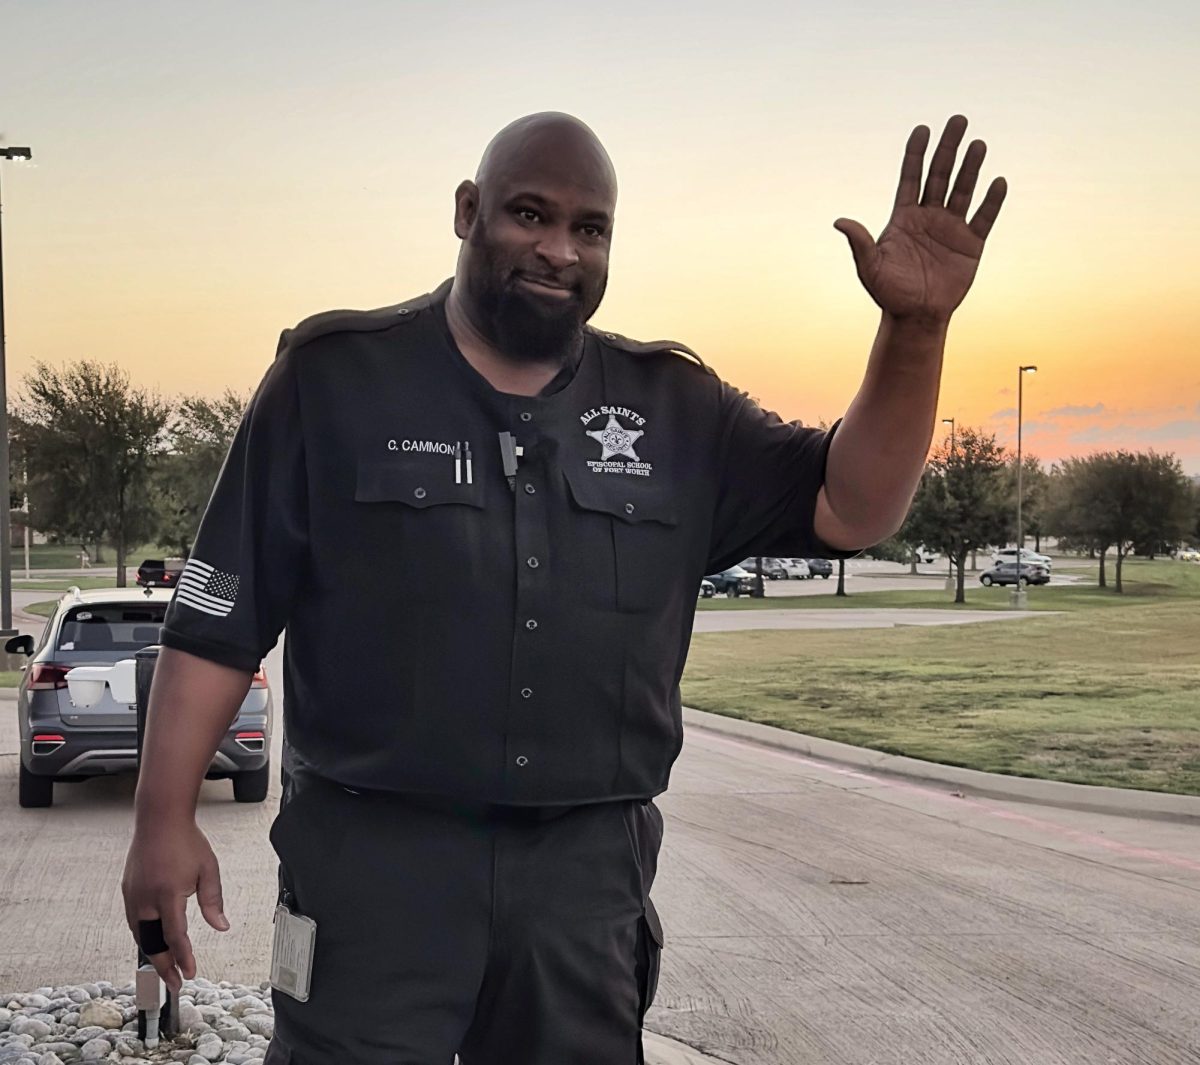 All Saints Beloved Life Safety Officer Brings Smiles and Safety to Campus